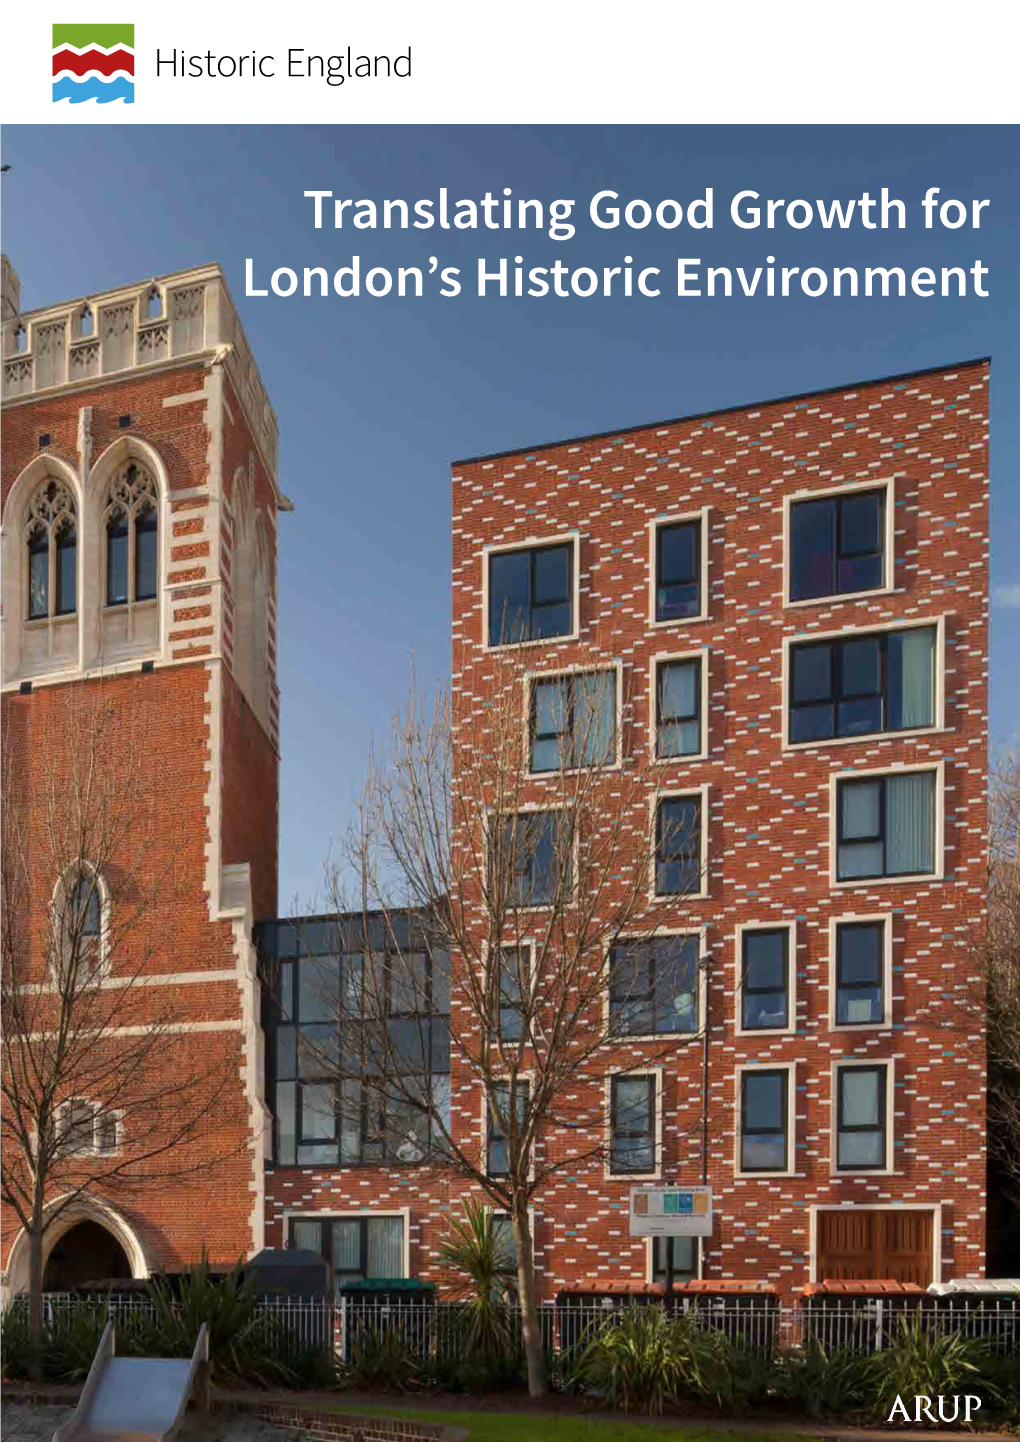 Translating Good Growth for London's Historic Environment